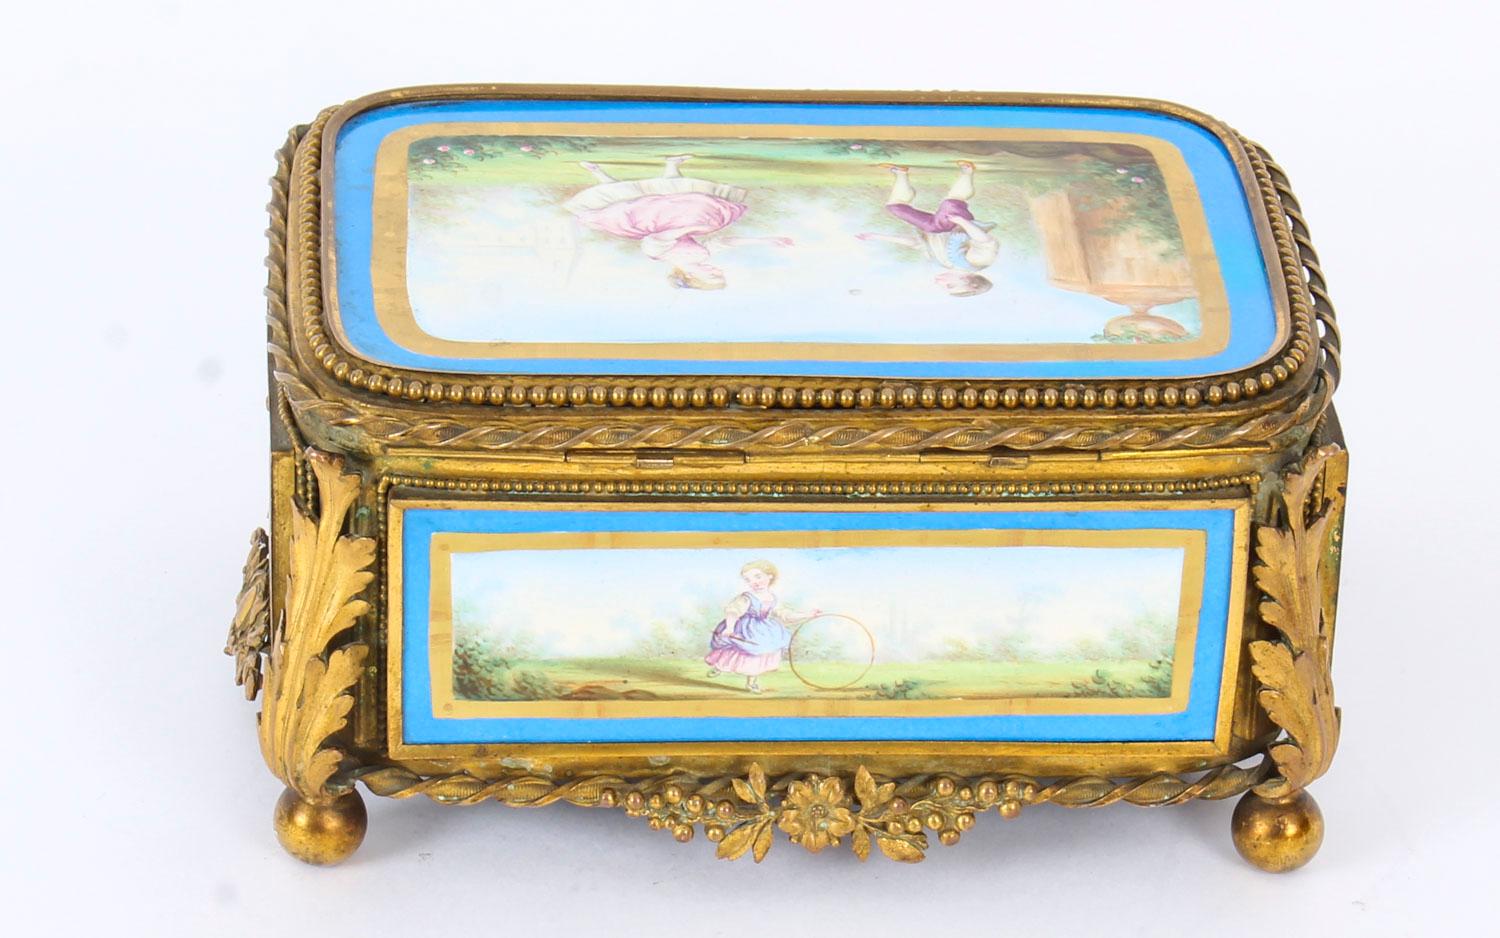 Antique French Sevres Porcelain and Ormolu Jewellery Casket 19th Century  For Sale 5